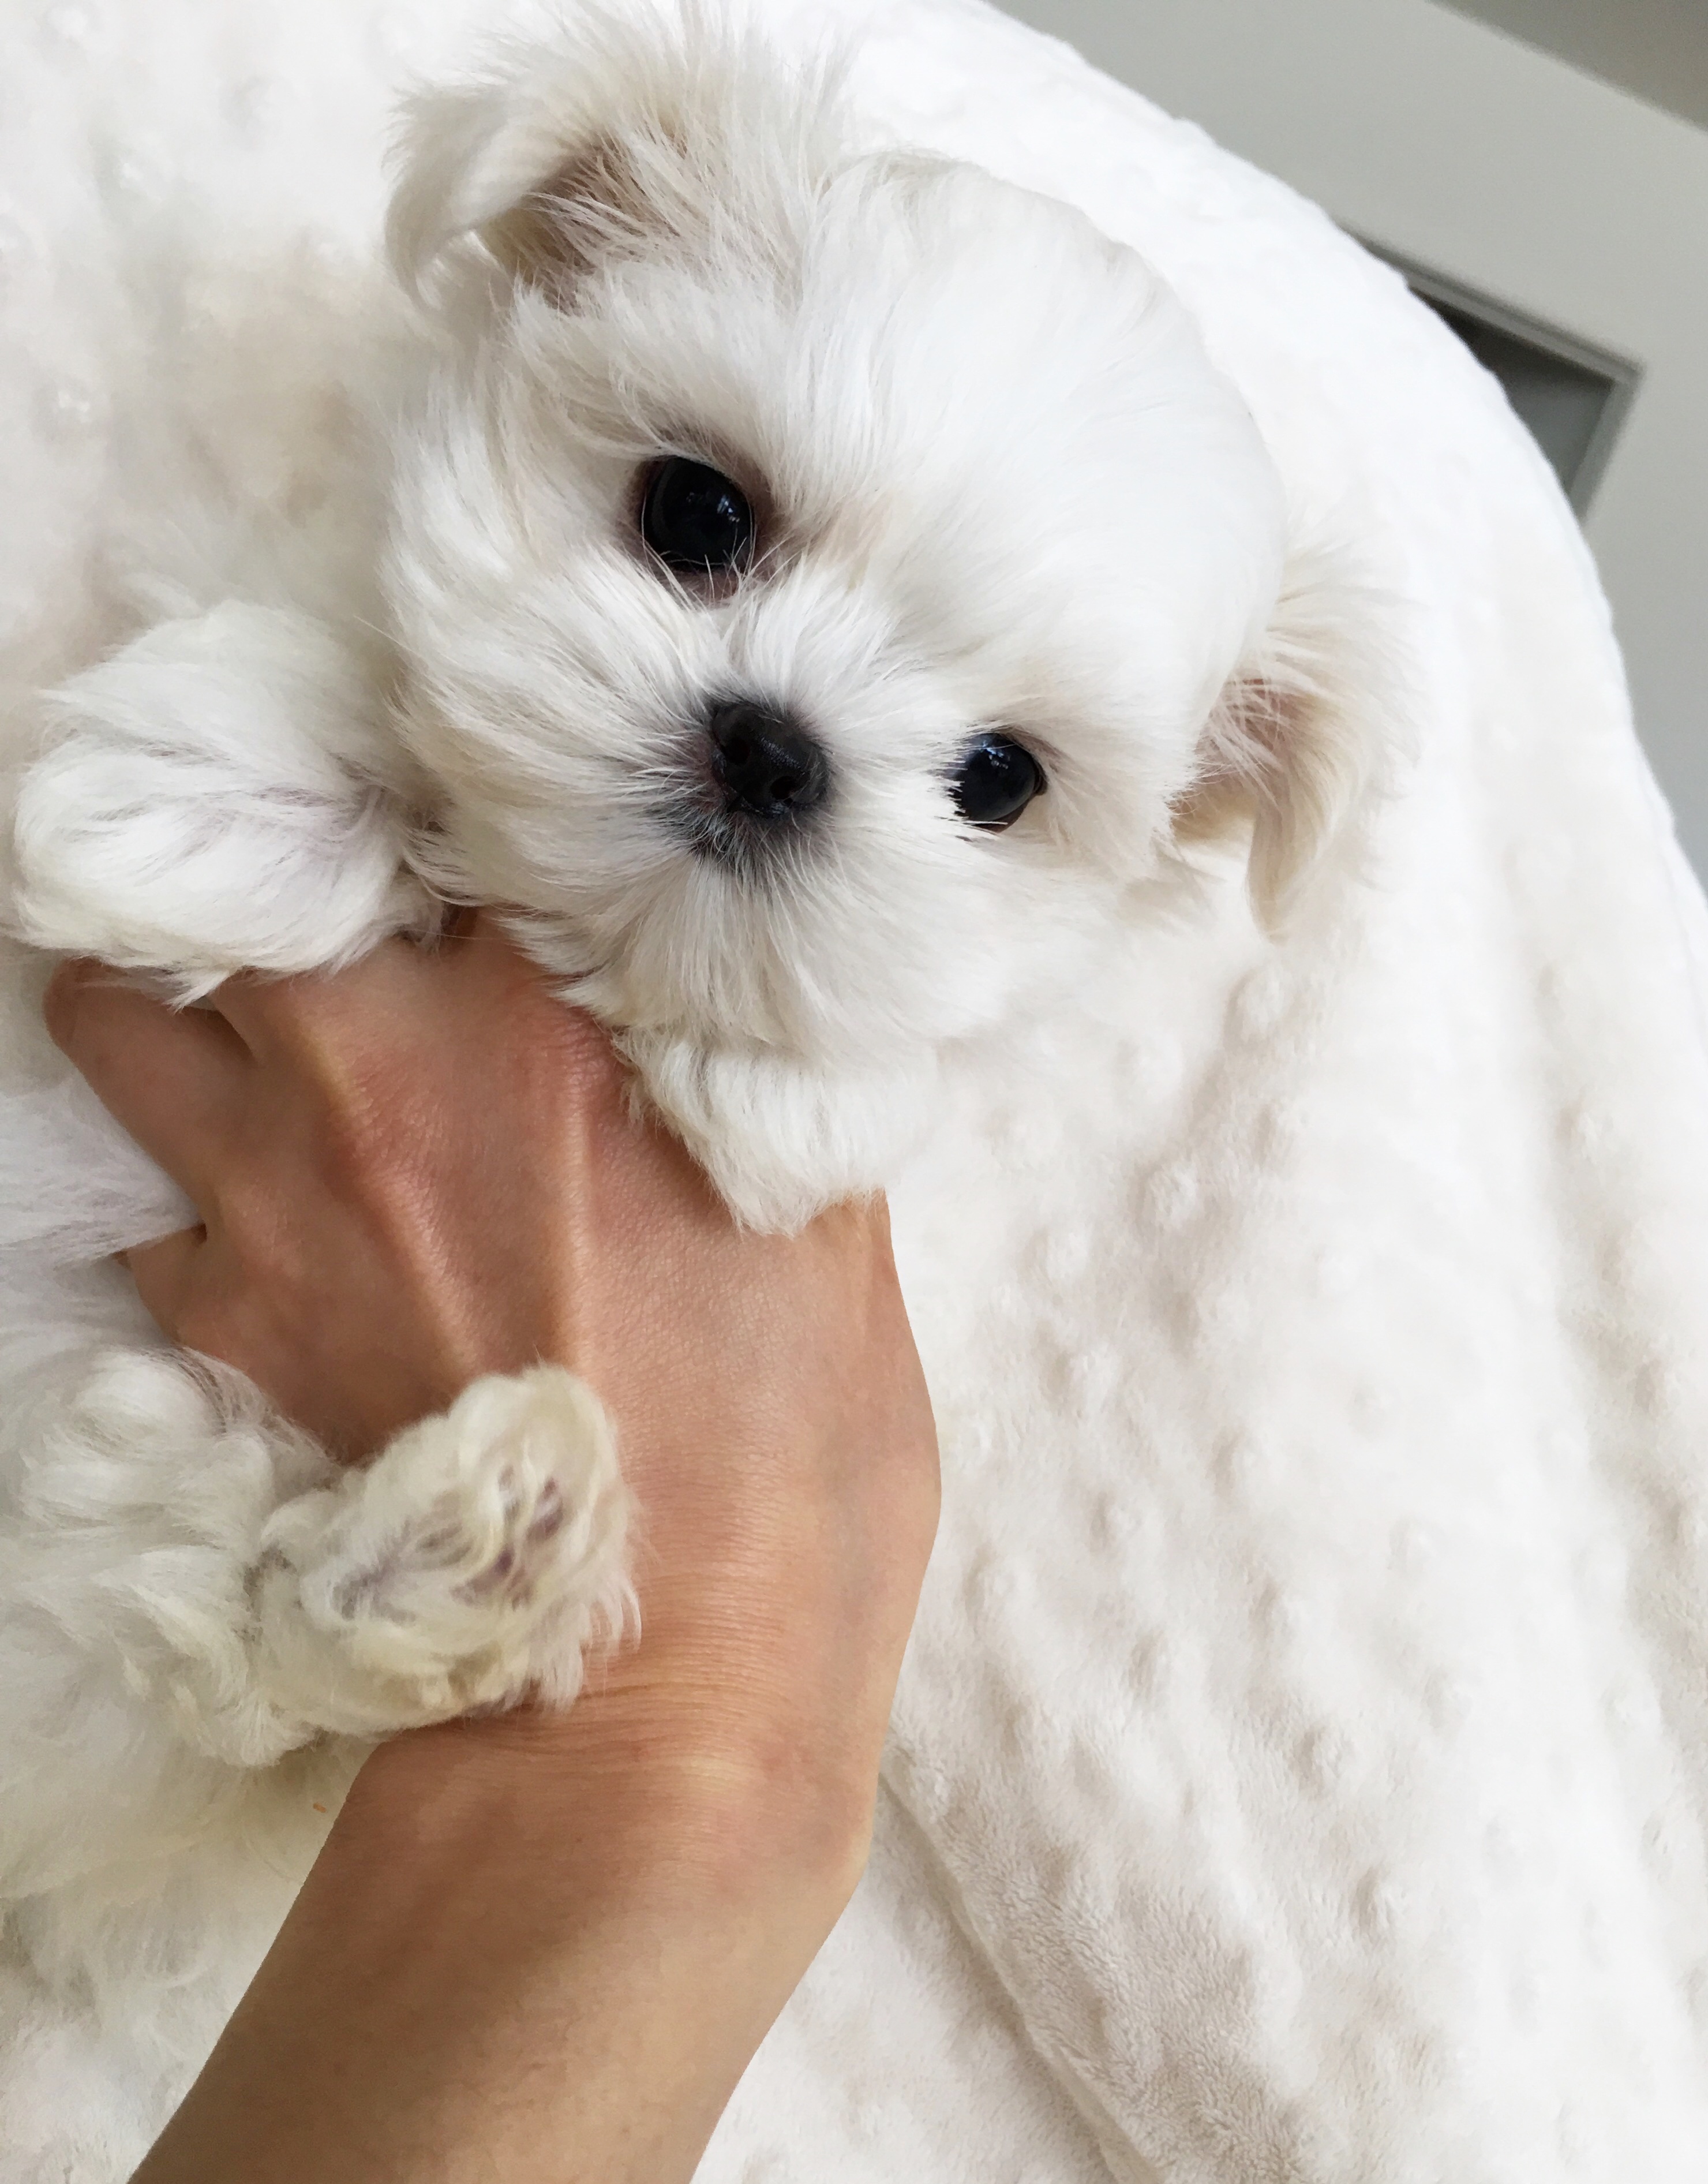 teacup maltese puppies for sale near me